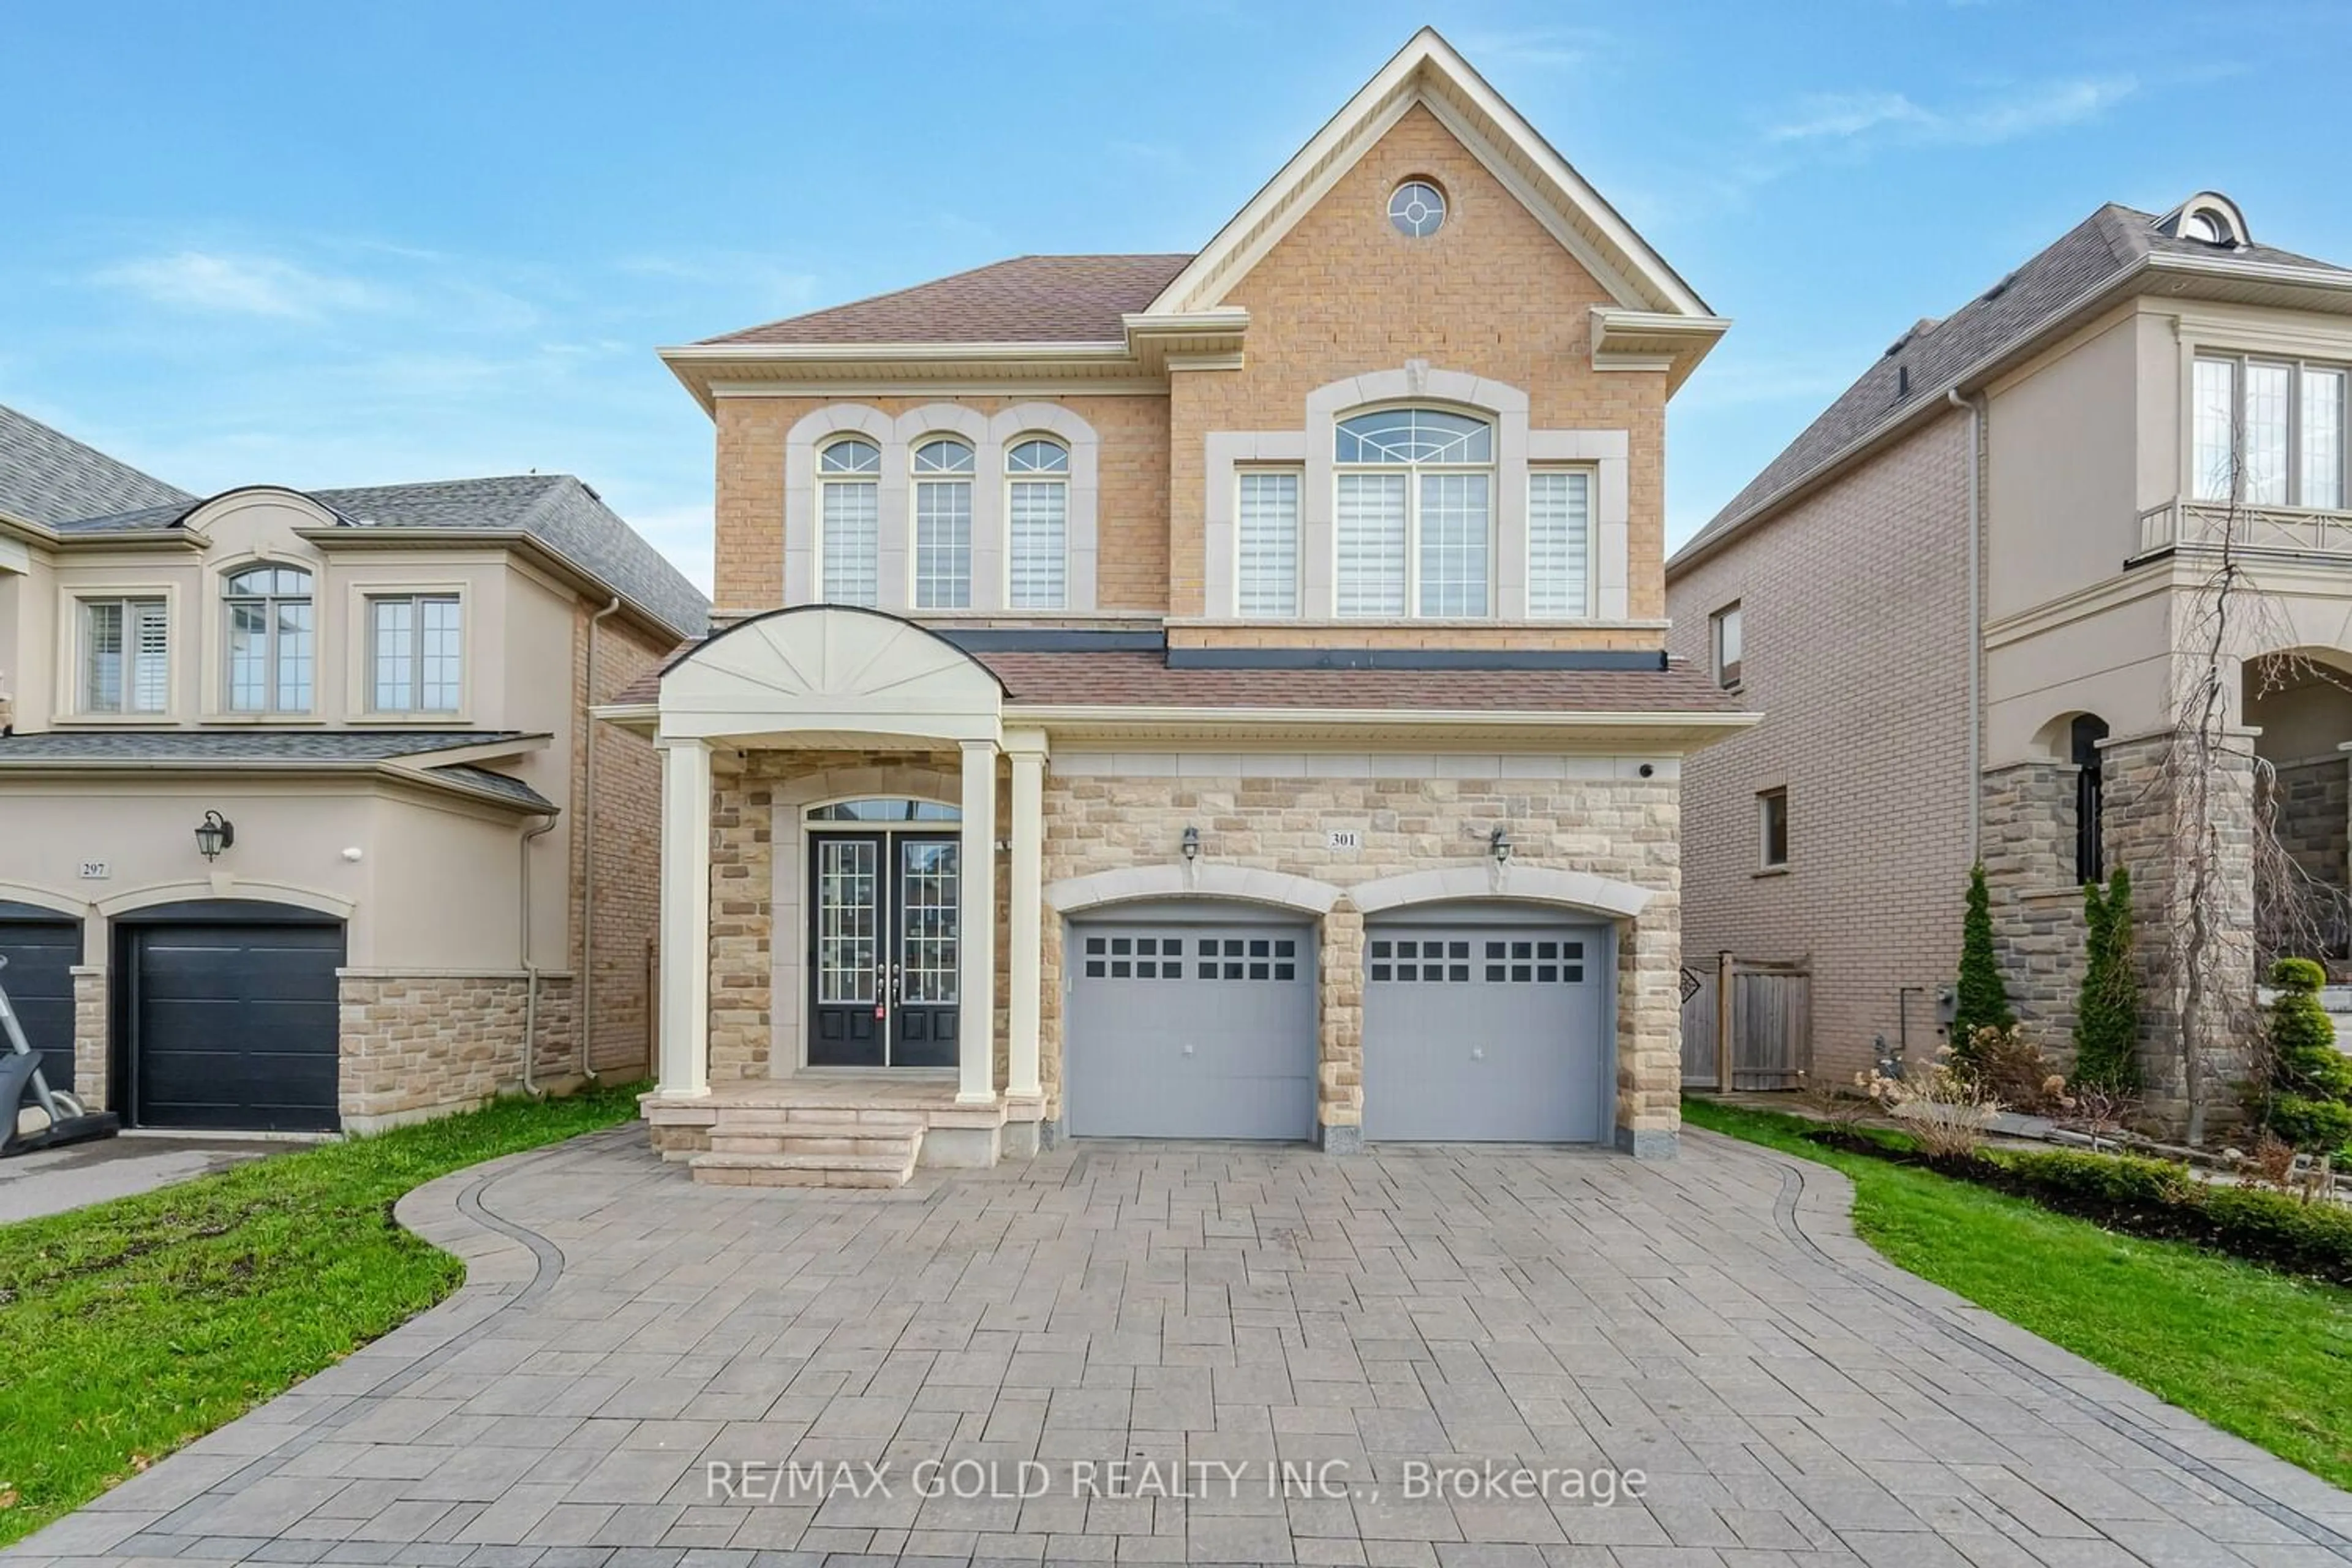 Home with brick exterior material for 301 Chatfield Dr, Vaughan Ontario L4H 3R7